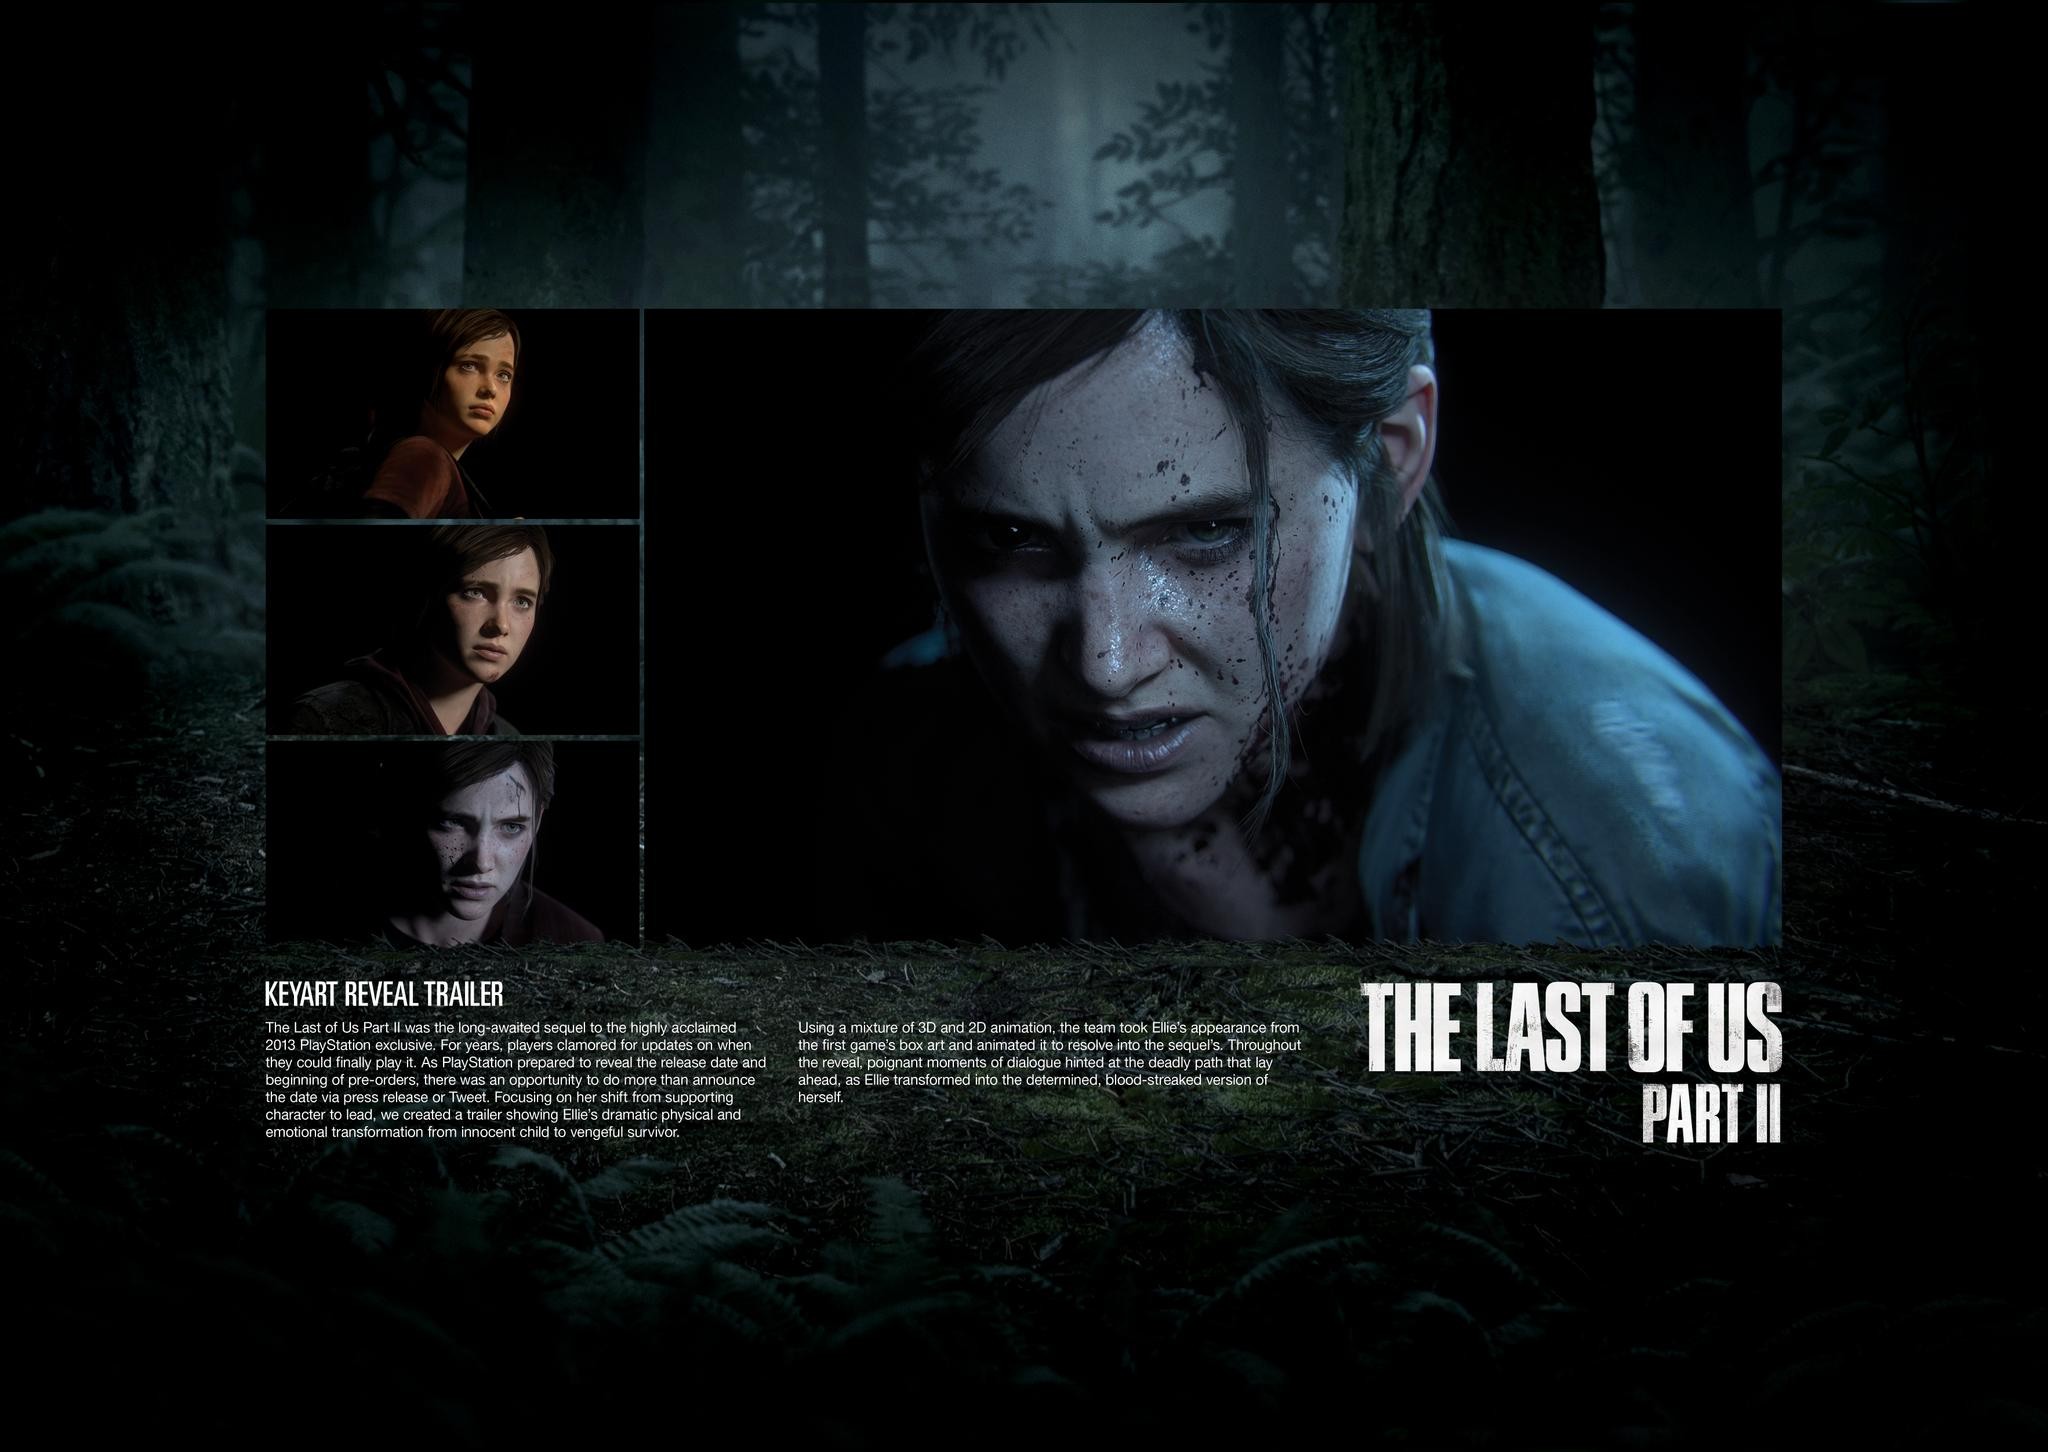 The Last of Us Part II – From The Beginning